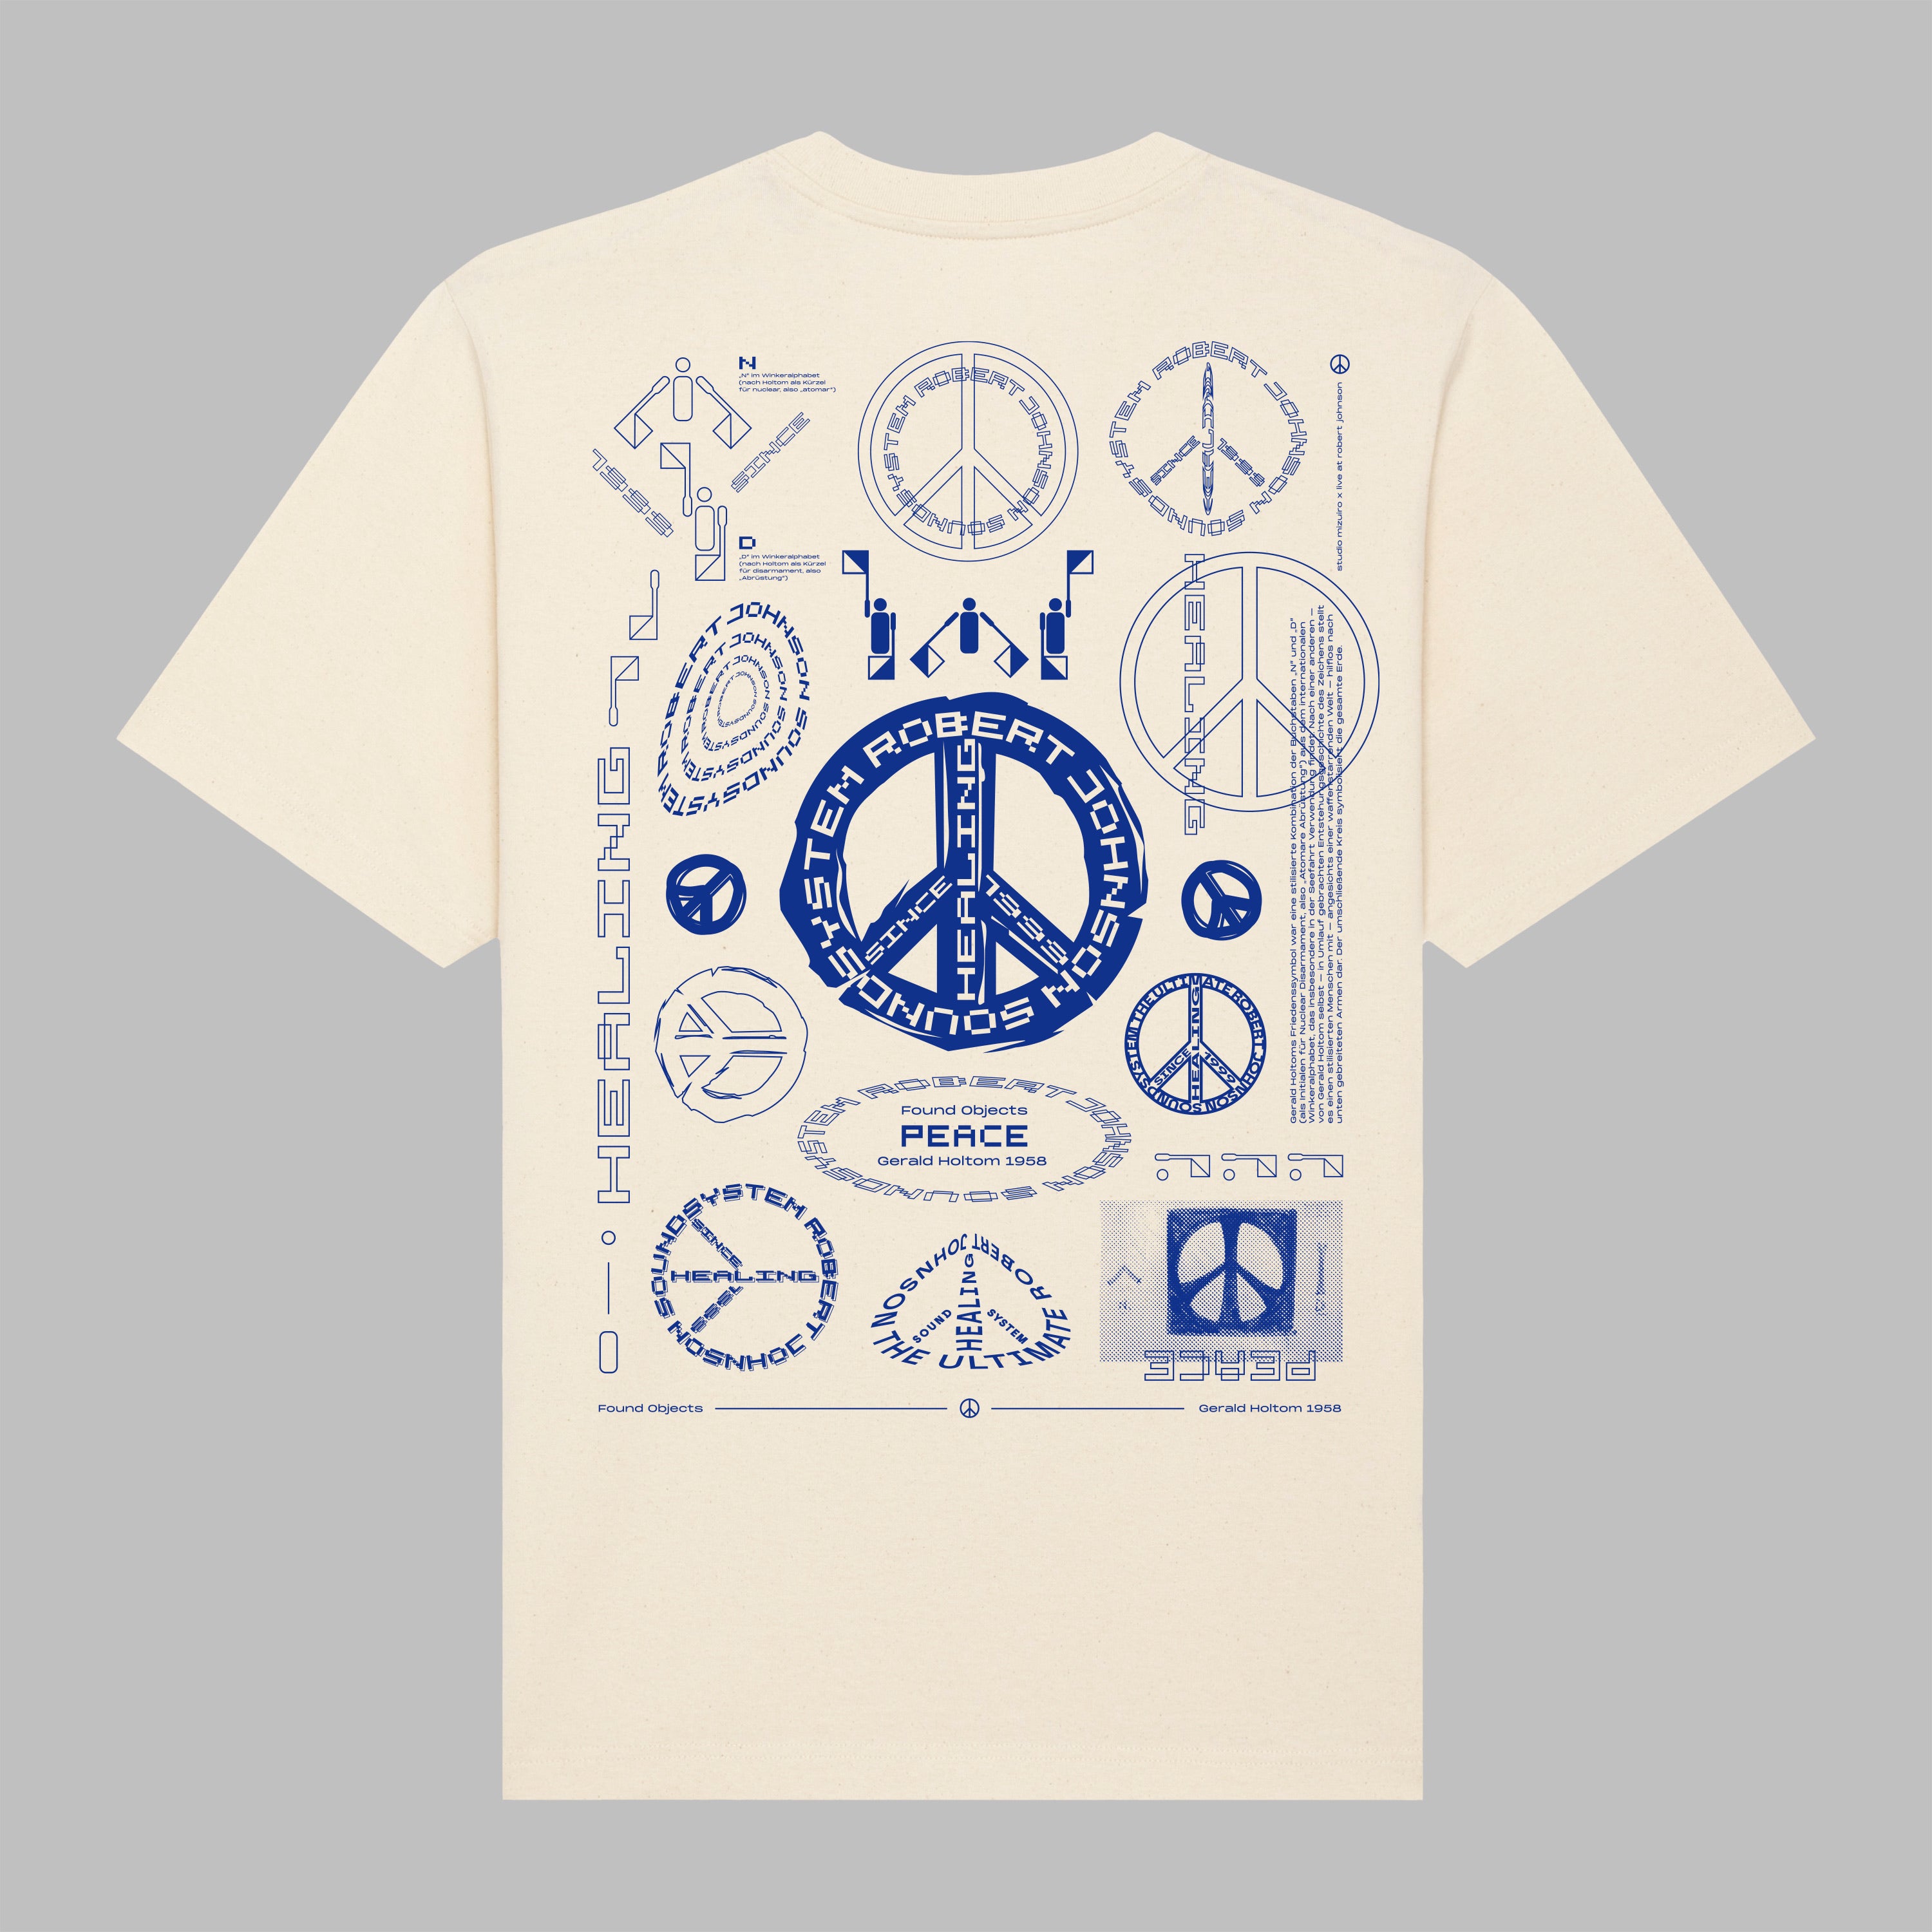 "Found Objects: Peace by Gerald Holtom!" - Shirt - Natural Raw